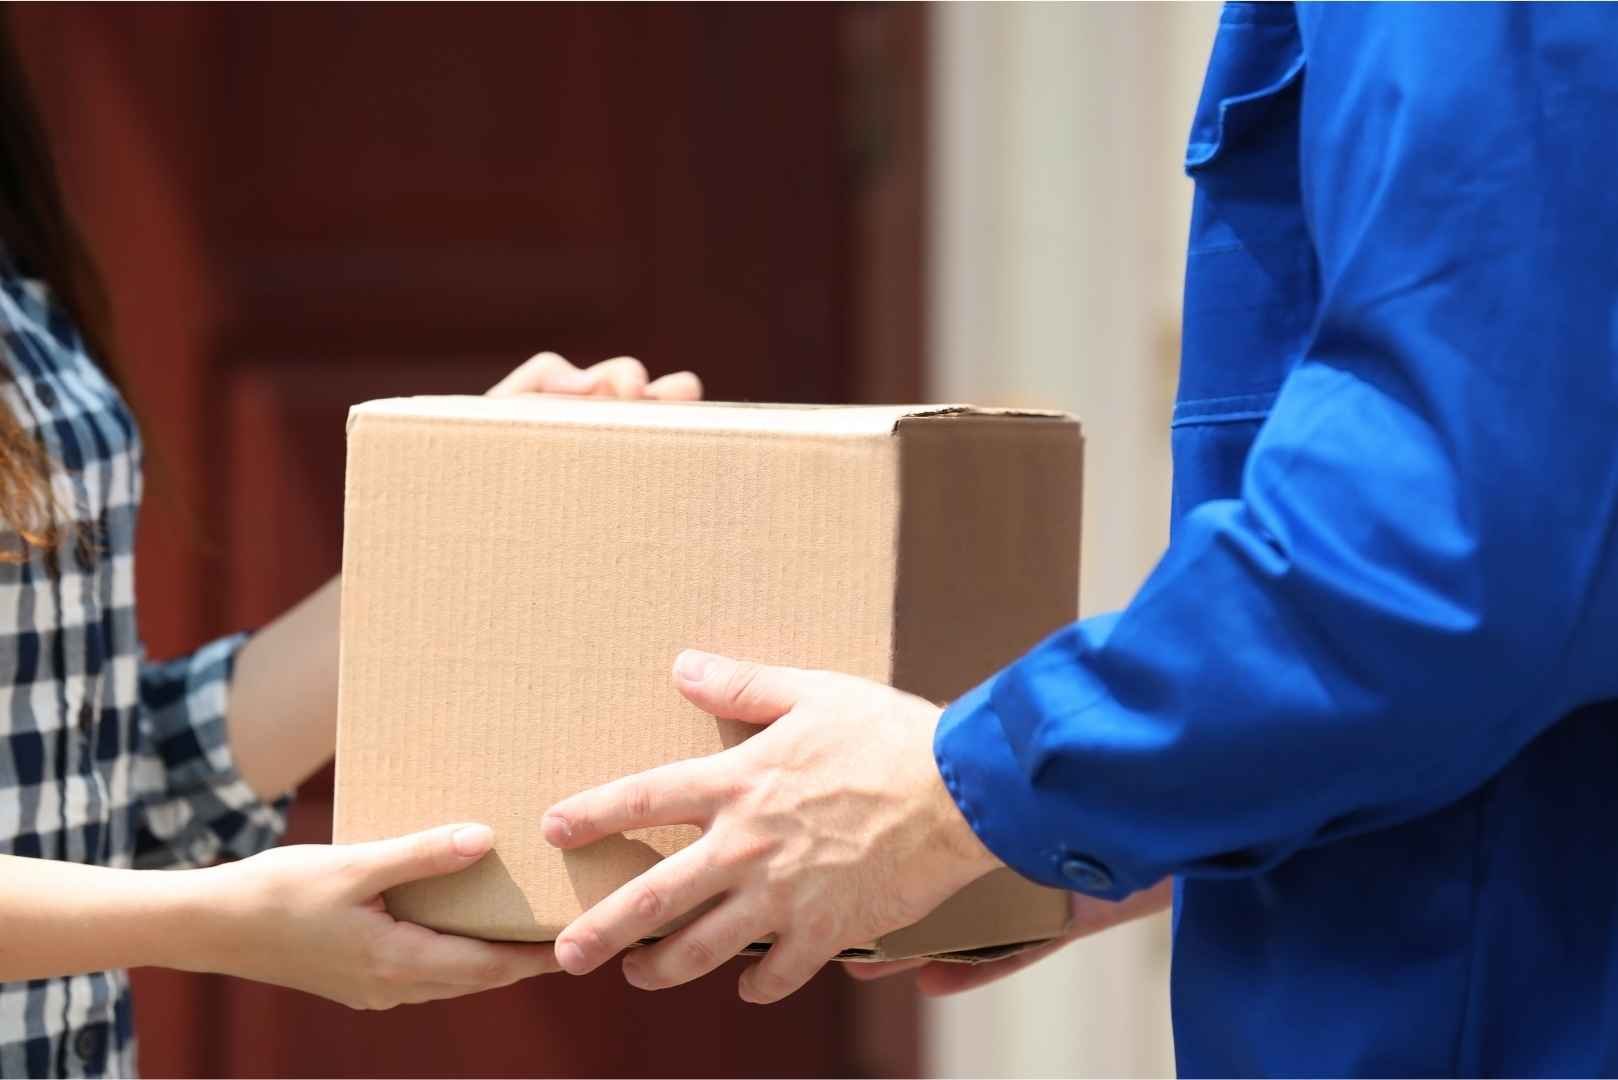 Delivery man giving the package to a woman up close